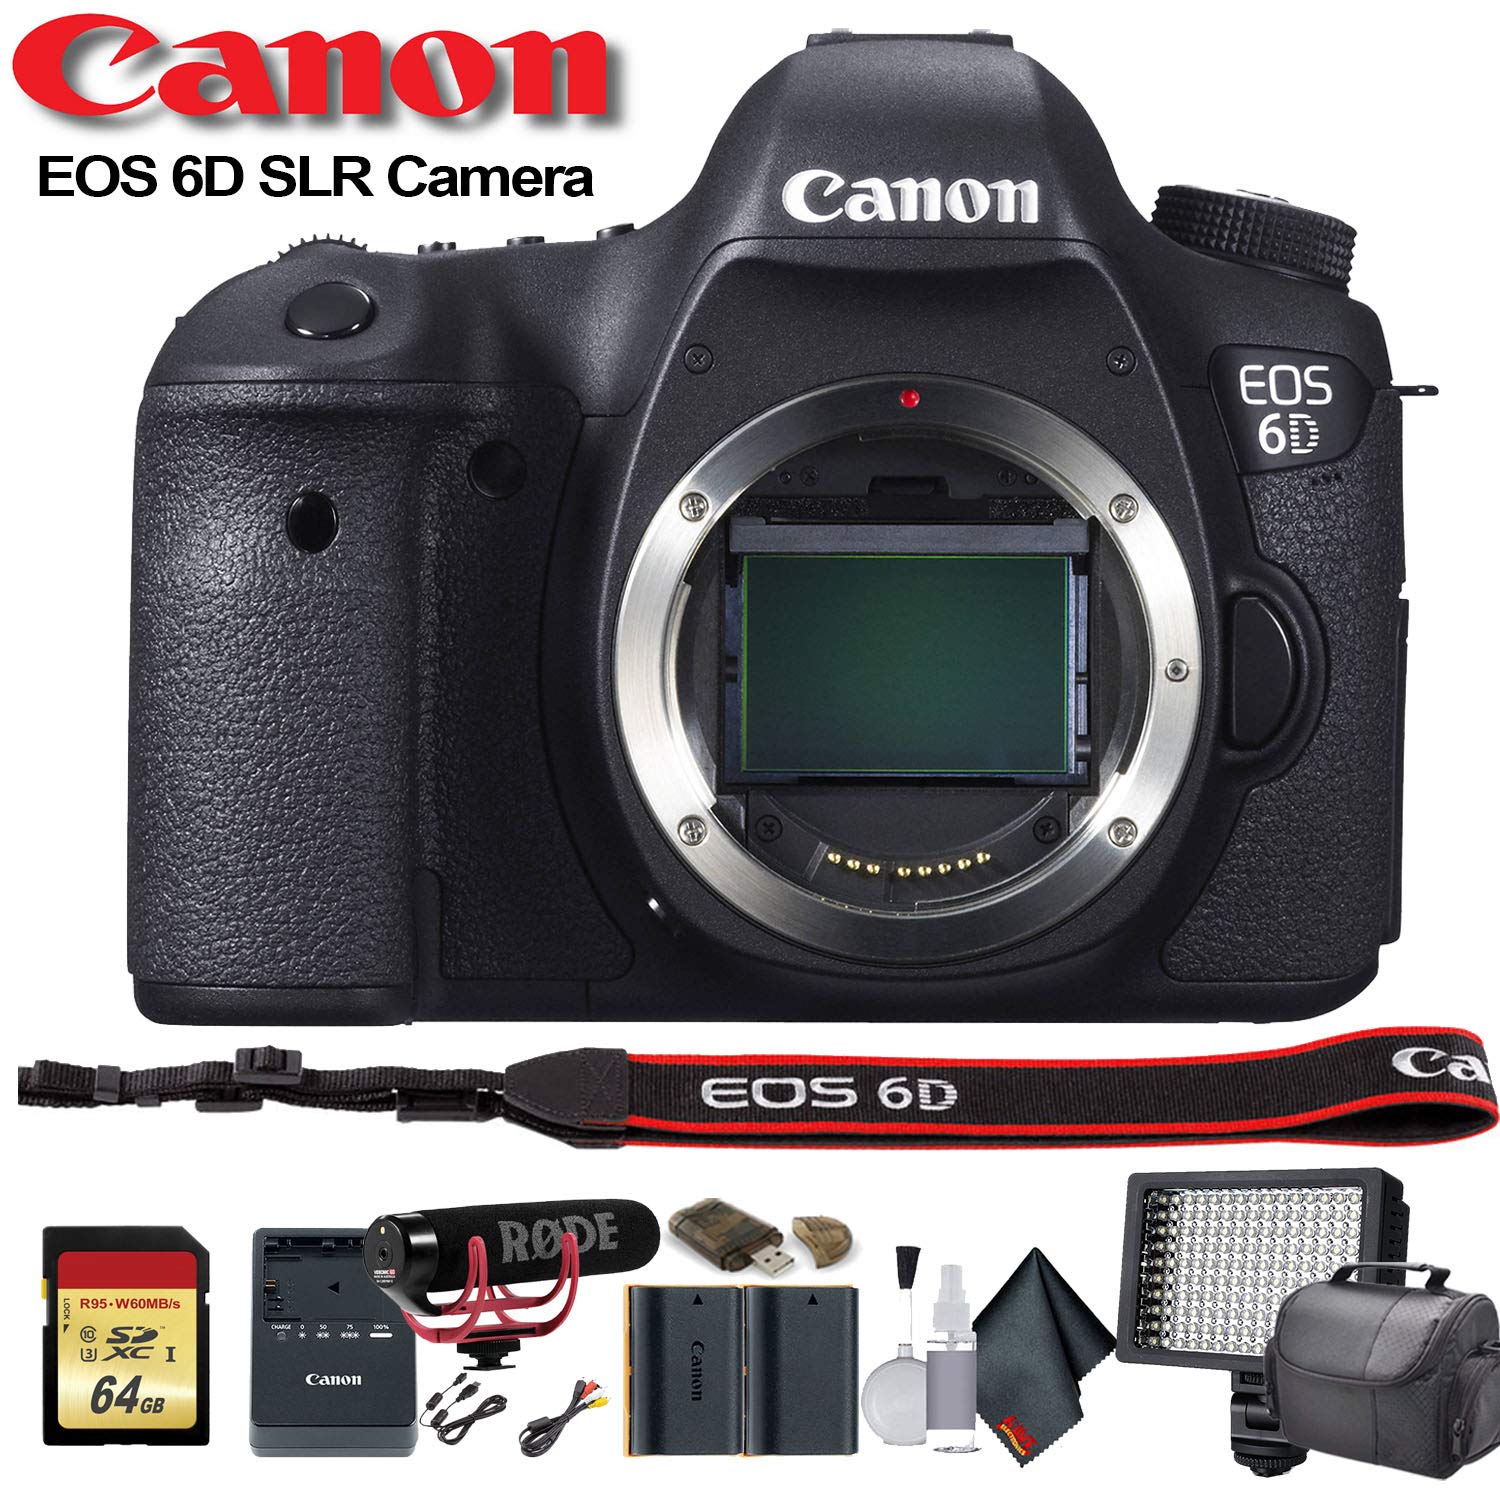 Canon EOS 6D DSLR Camera (8035B002) W/Bag, Extra Battery, LED Light, Mic, Filters and More - Advanced Bundle